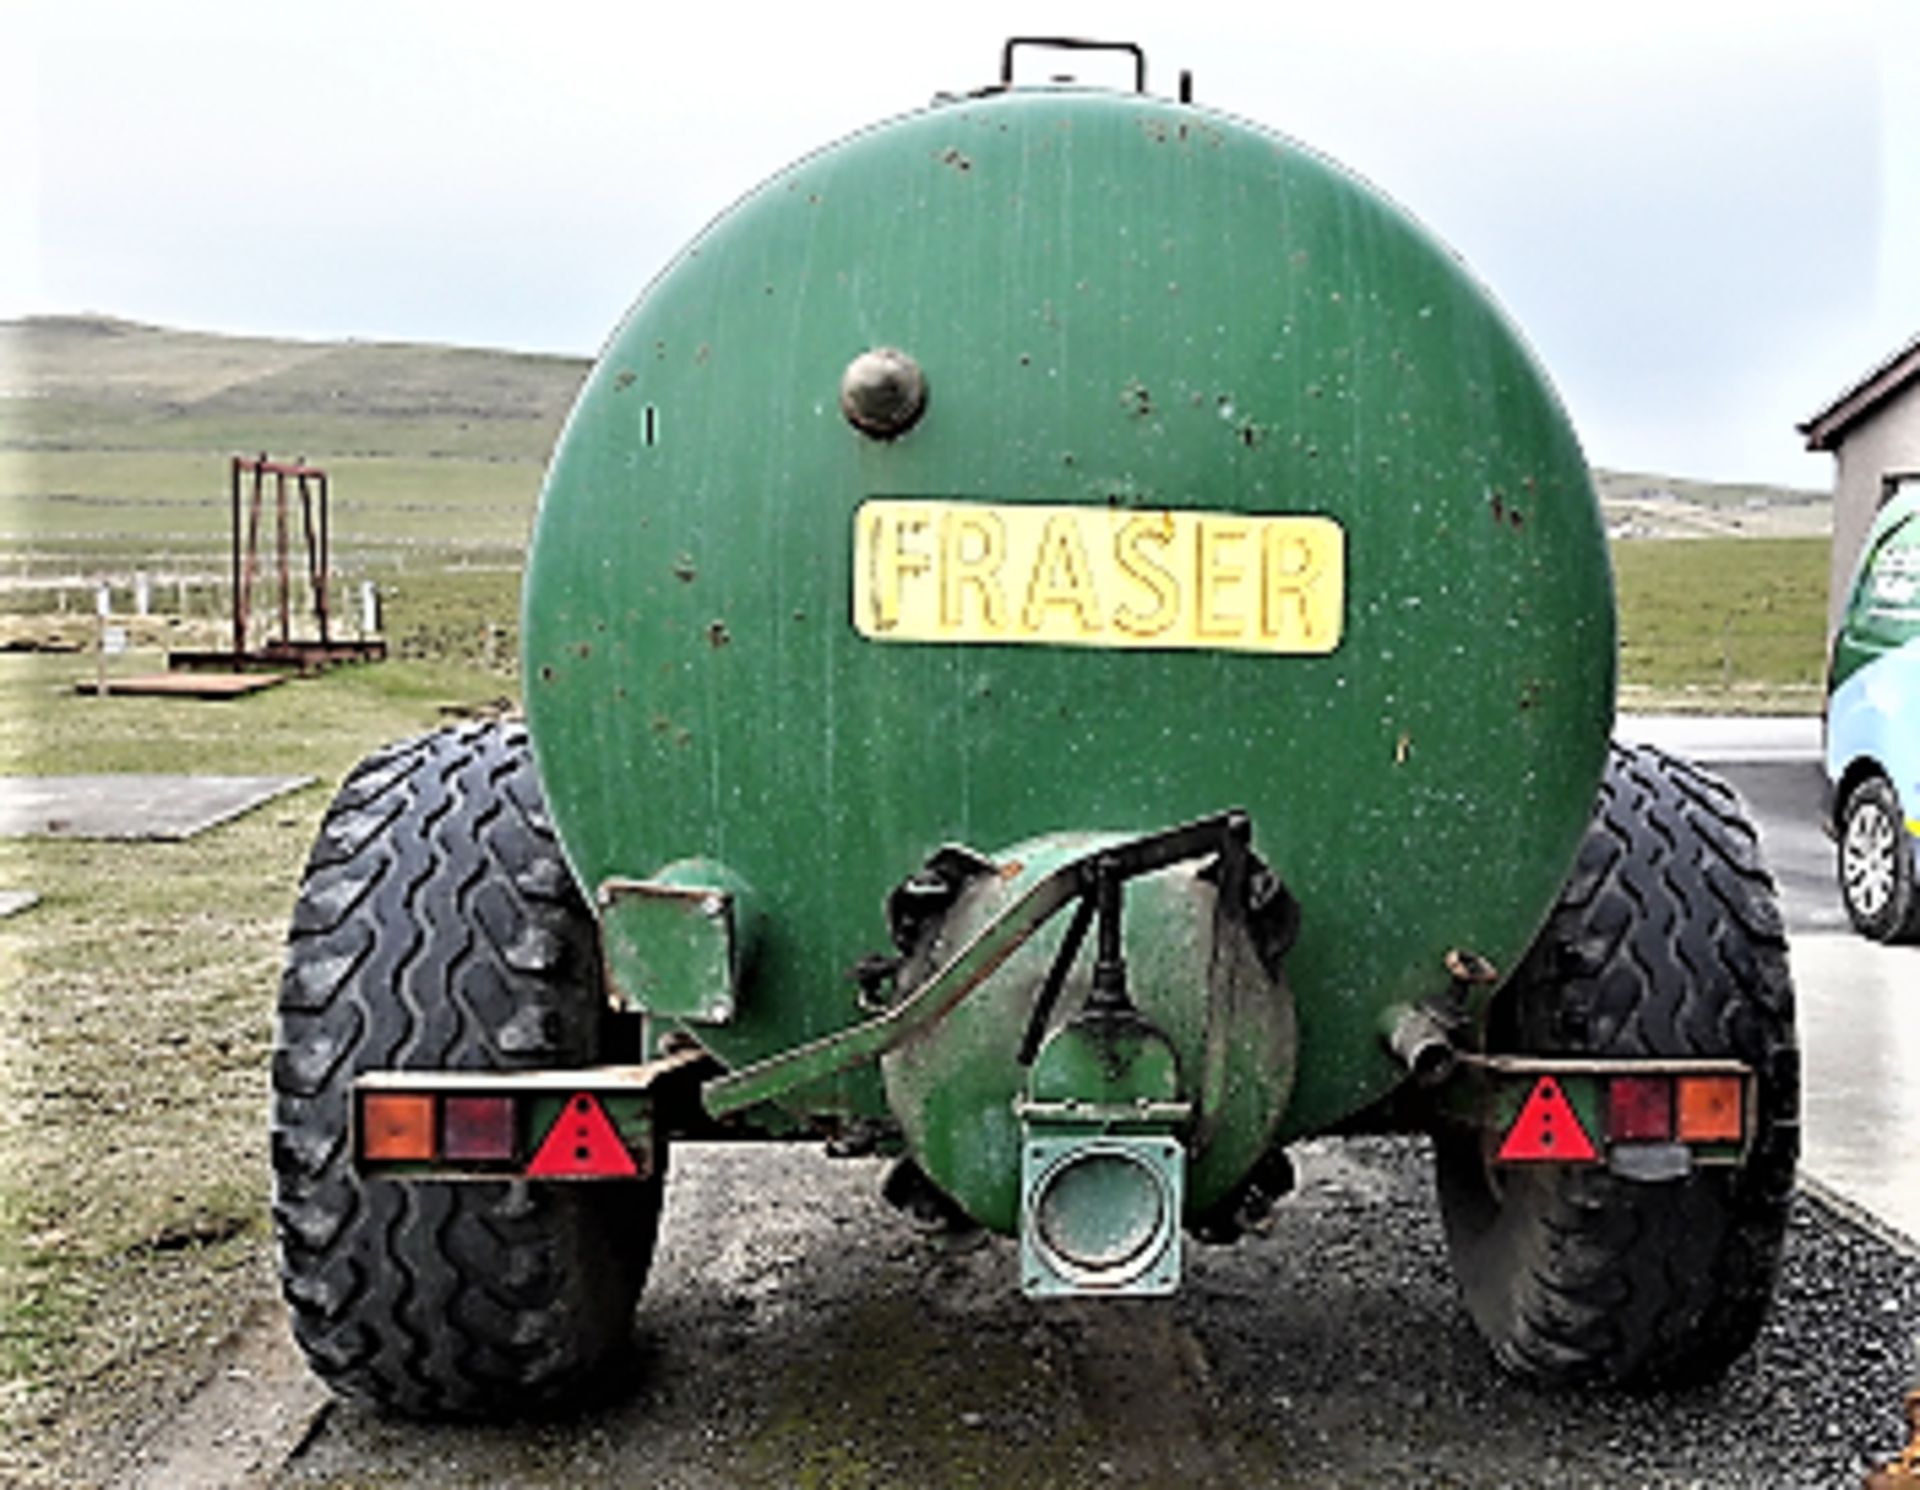 1994 FRASER SB7000 slurry tanker s/n1484. Sold from Errol auction site. Viewing and uplift from West - Image 2 of 5